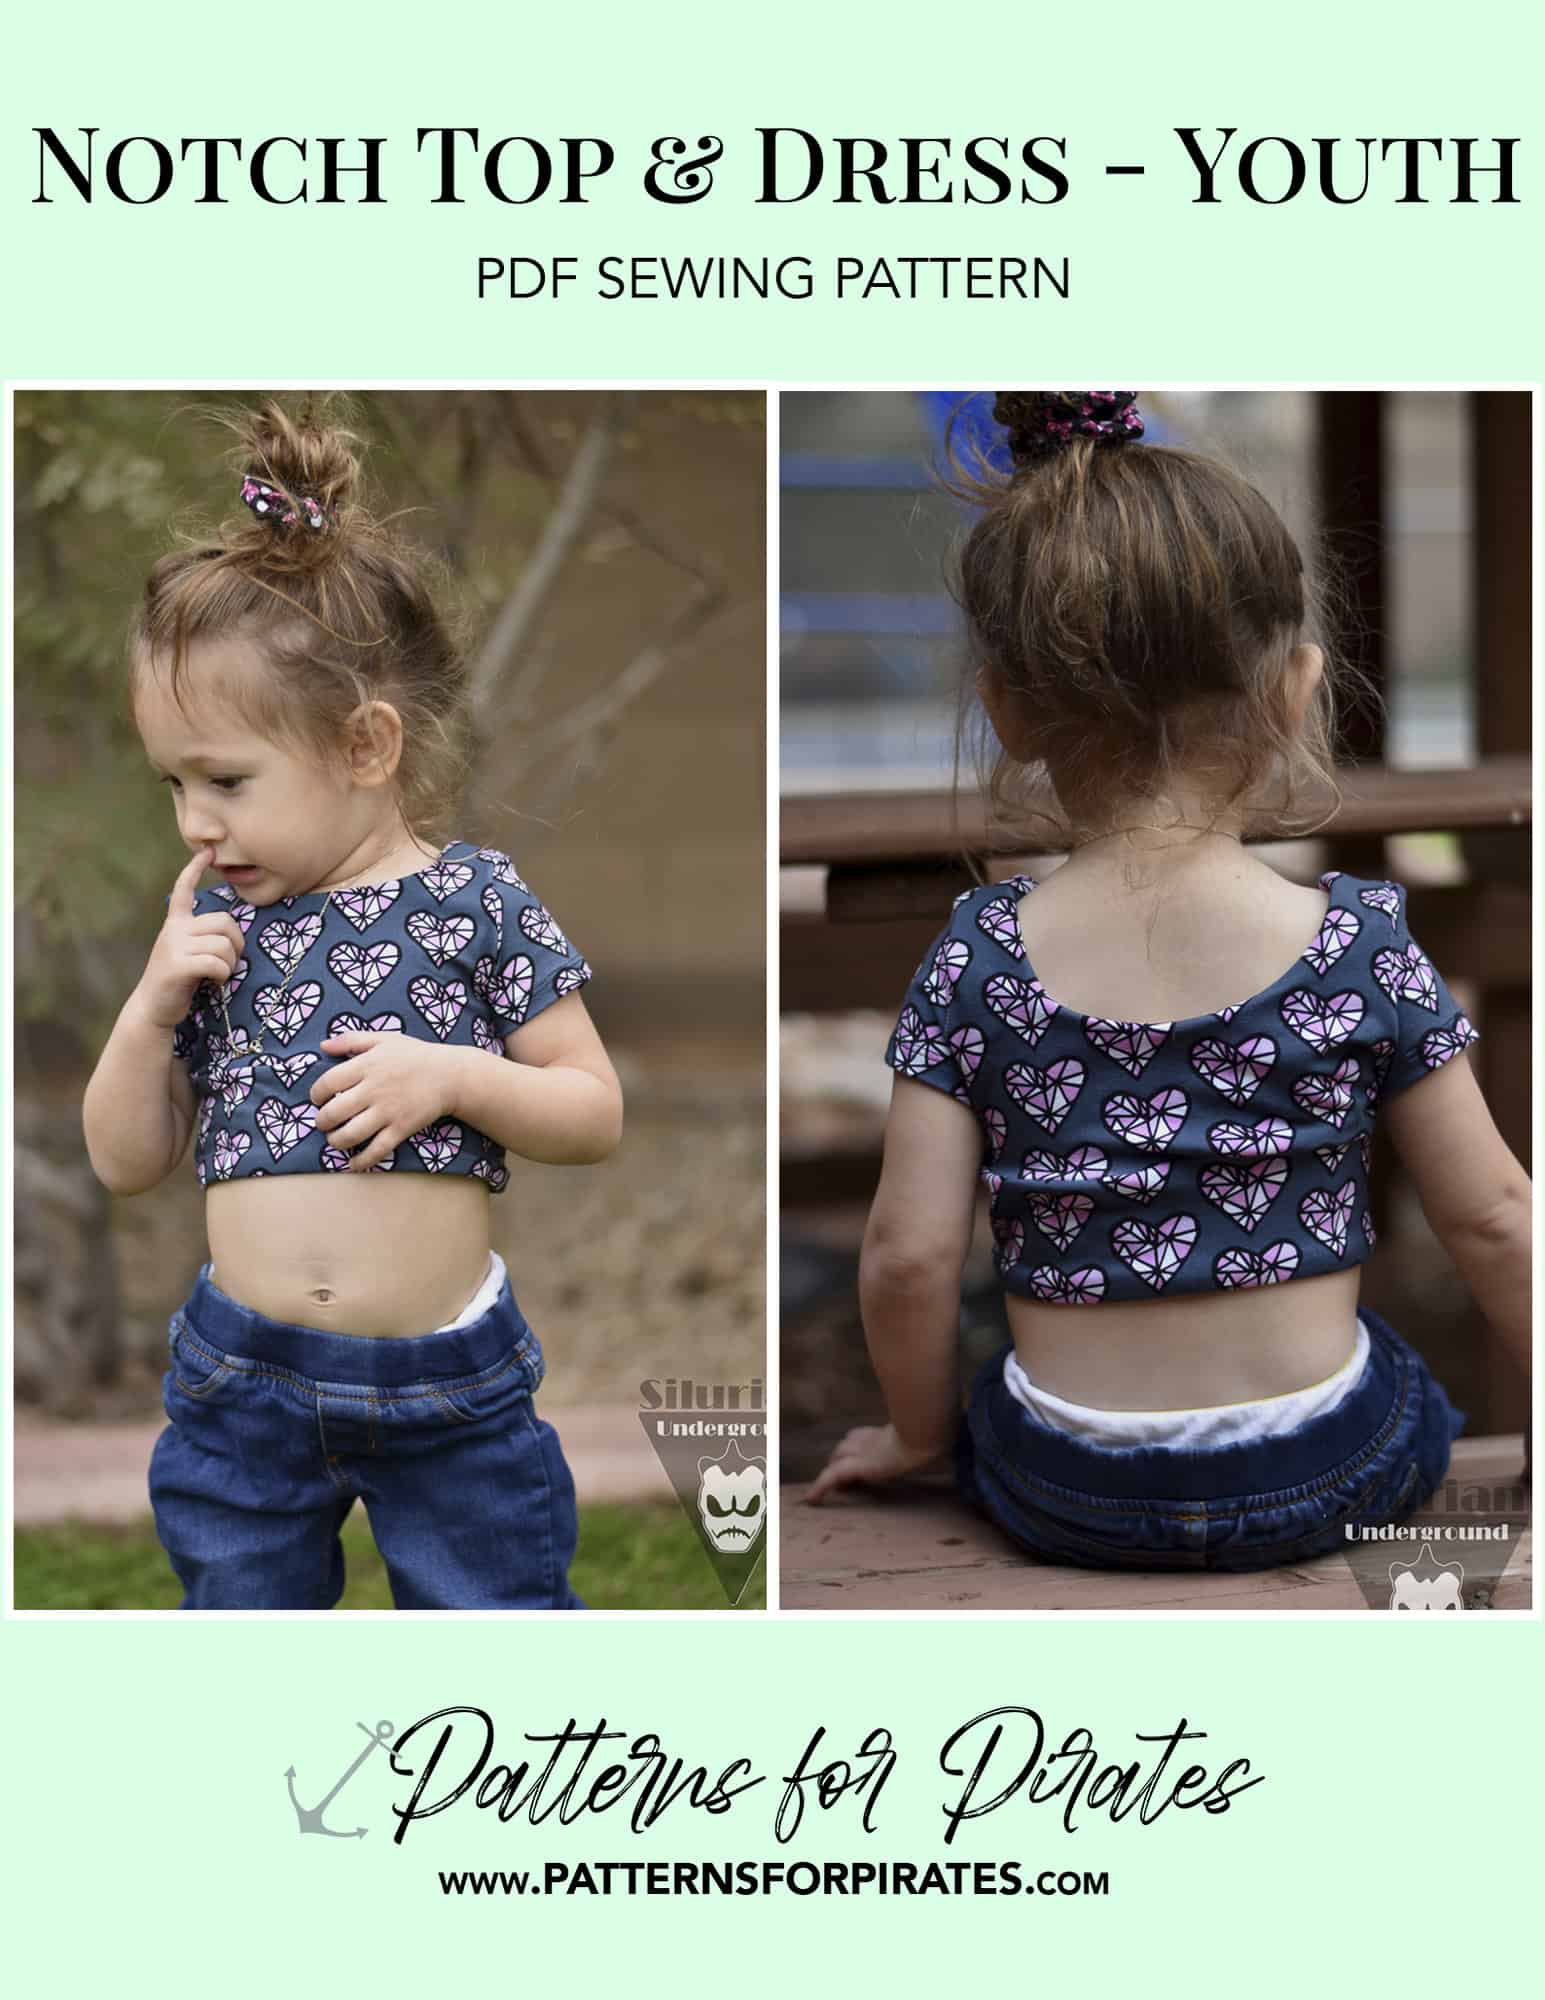 Notch Top & Dress - Youth - Patterns for Pirates